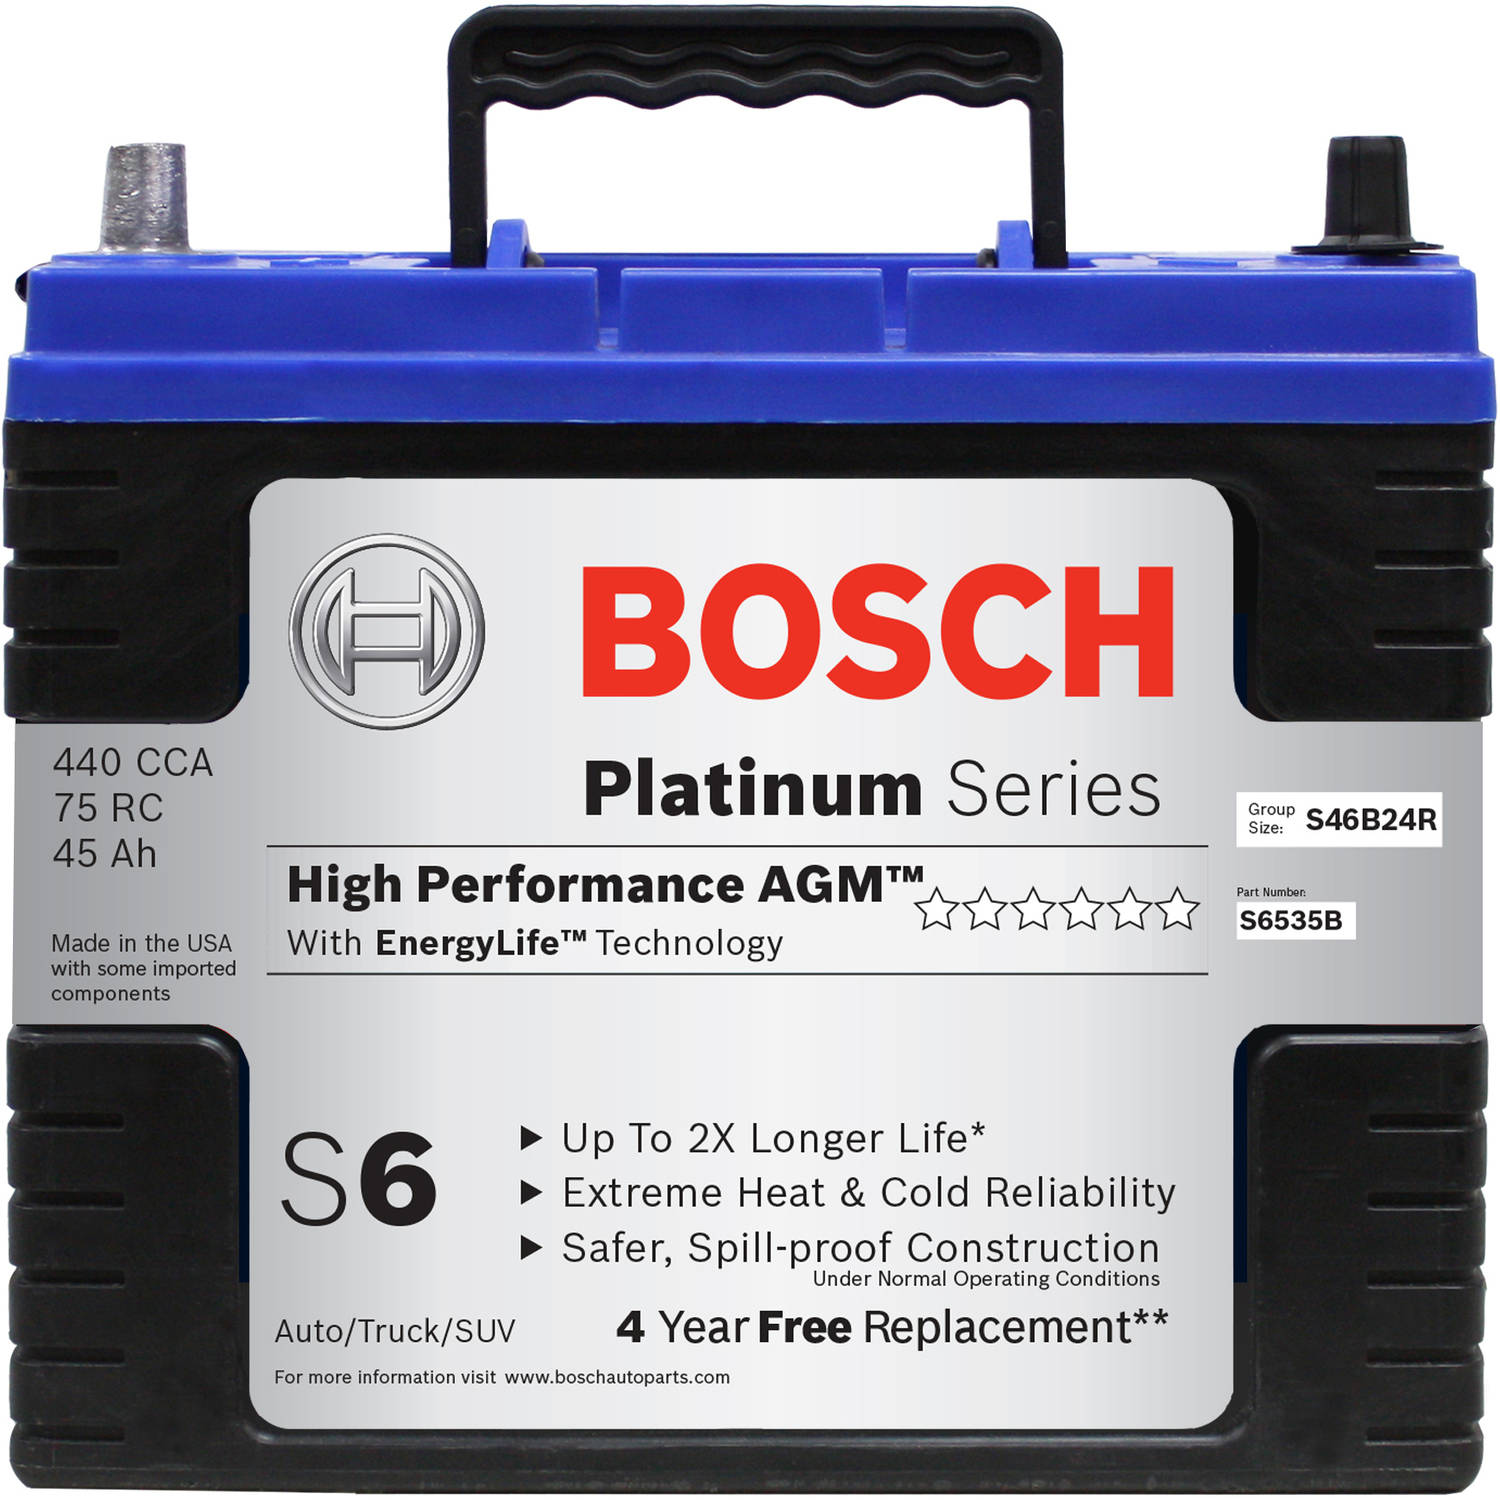 Bosch S6535B S6 Flat Plate AGM Battery - image 1 of 4